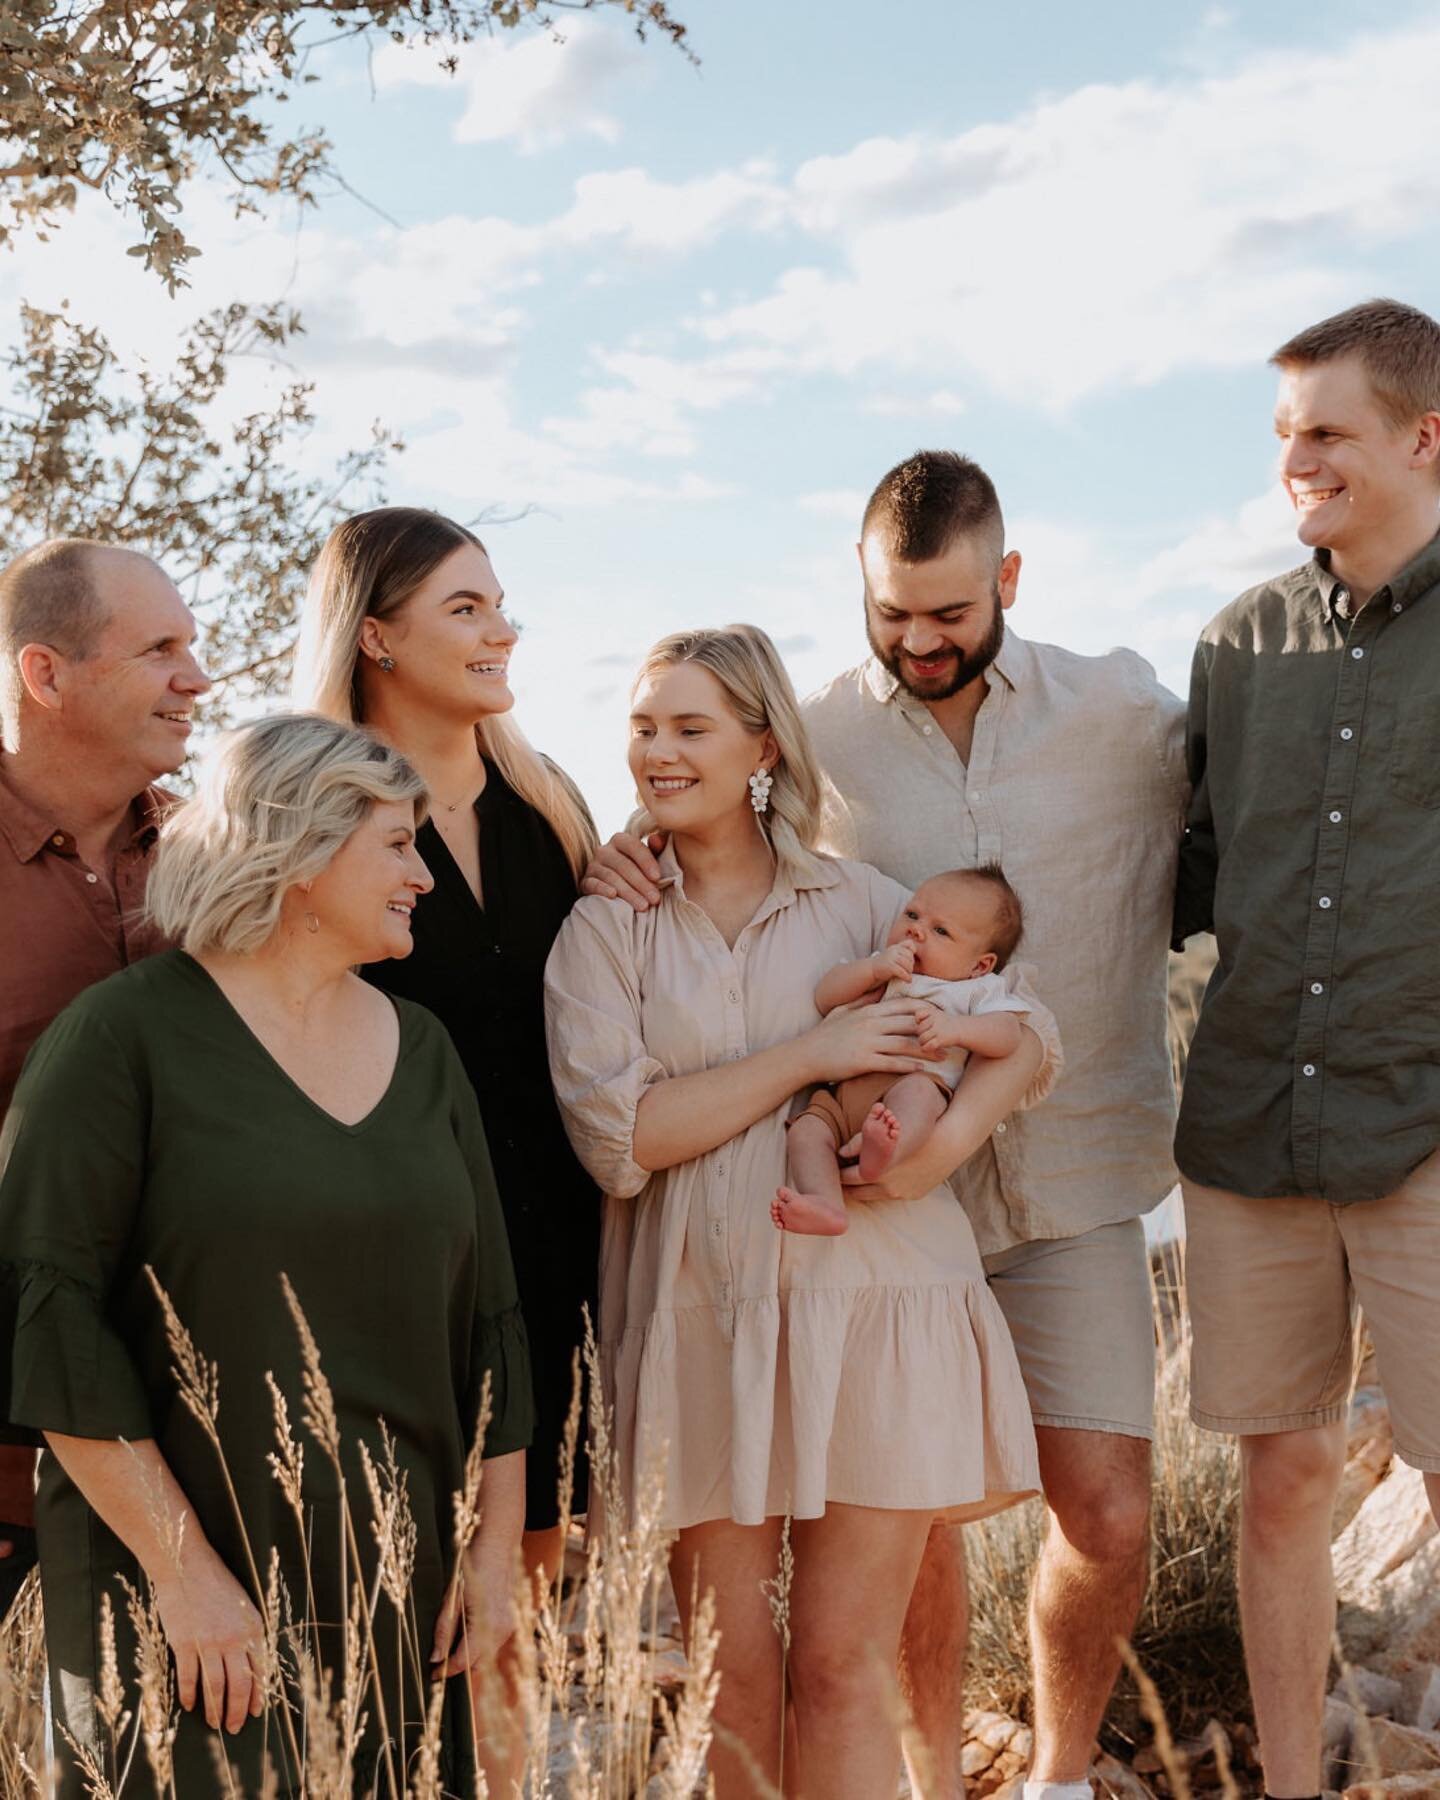 Your babies are never too old for photos, especially when time is fleeting and in the blink of an eye they will be leaving the nest and off on their own adventures 🥹

The beautiful Sellings family 🤍